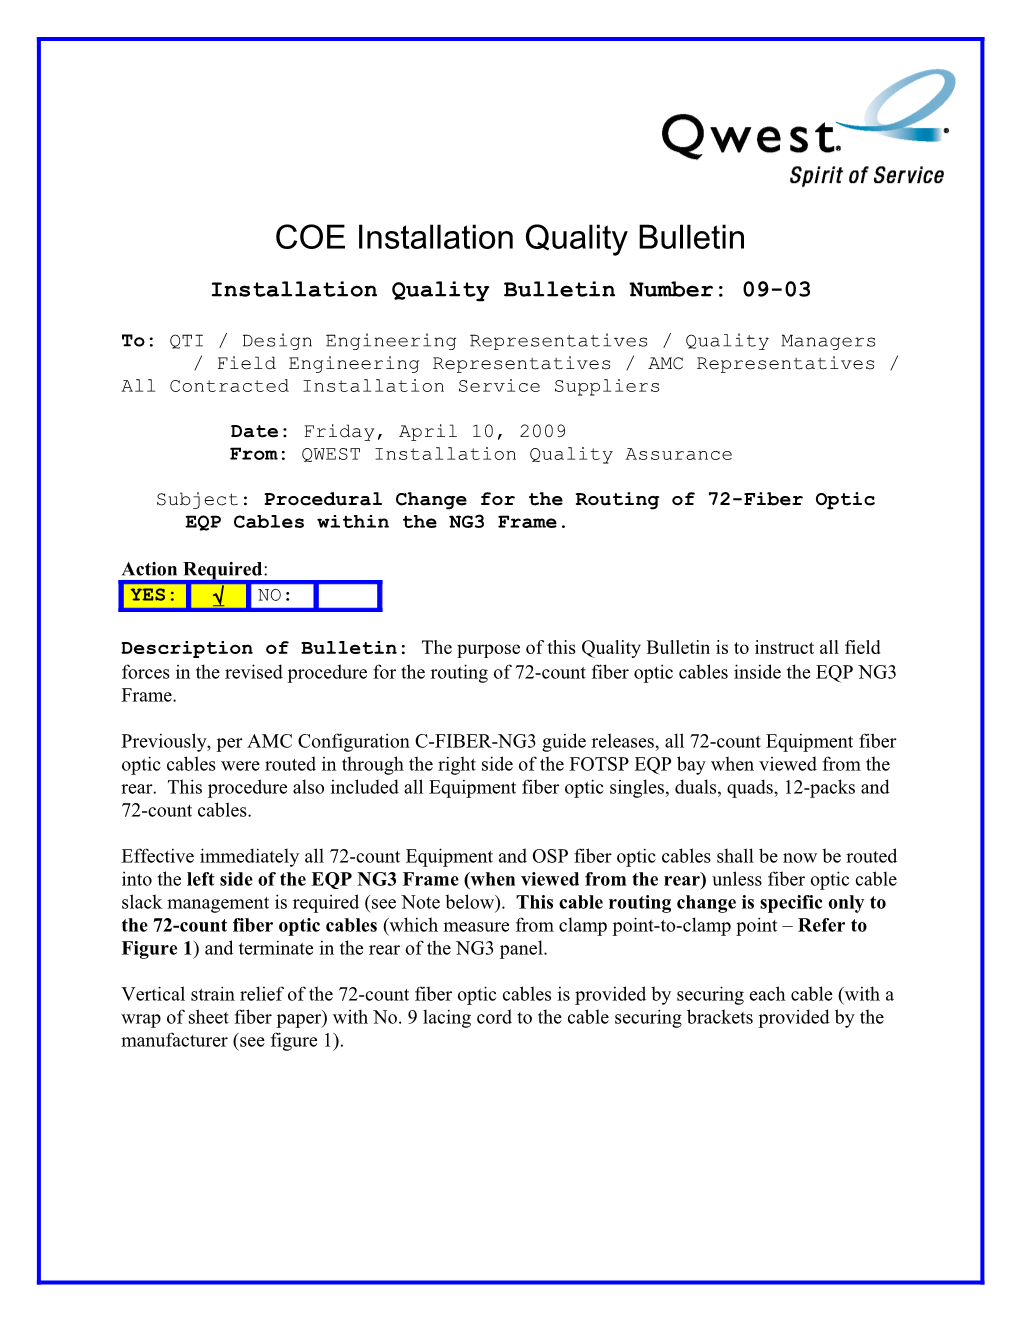 Installation Quality Bulletin Number: 09-03